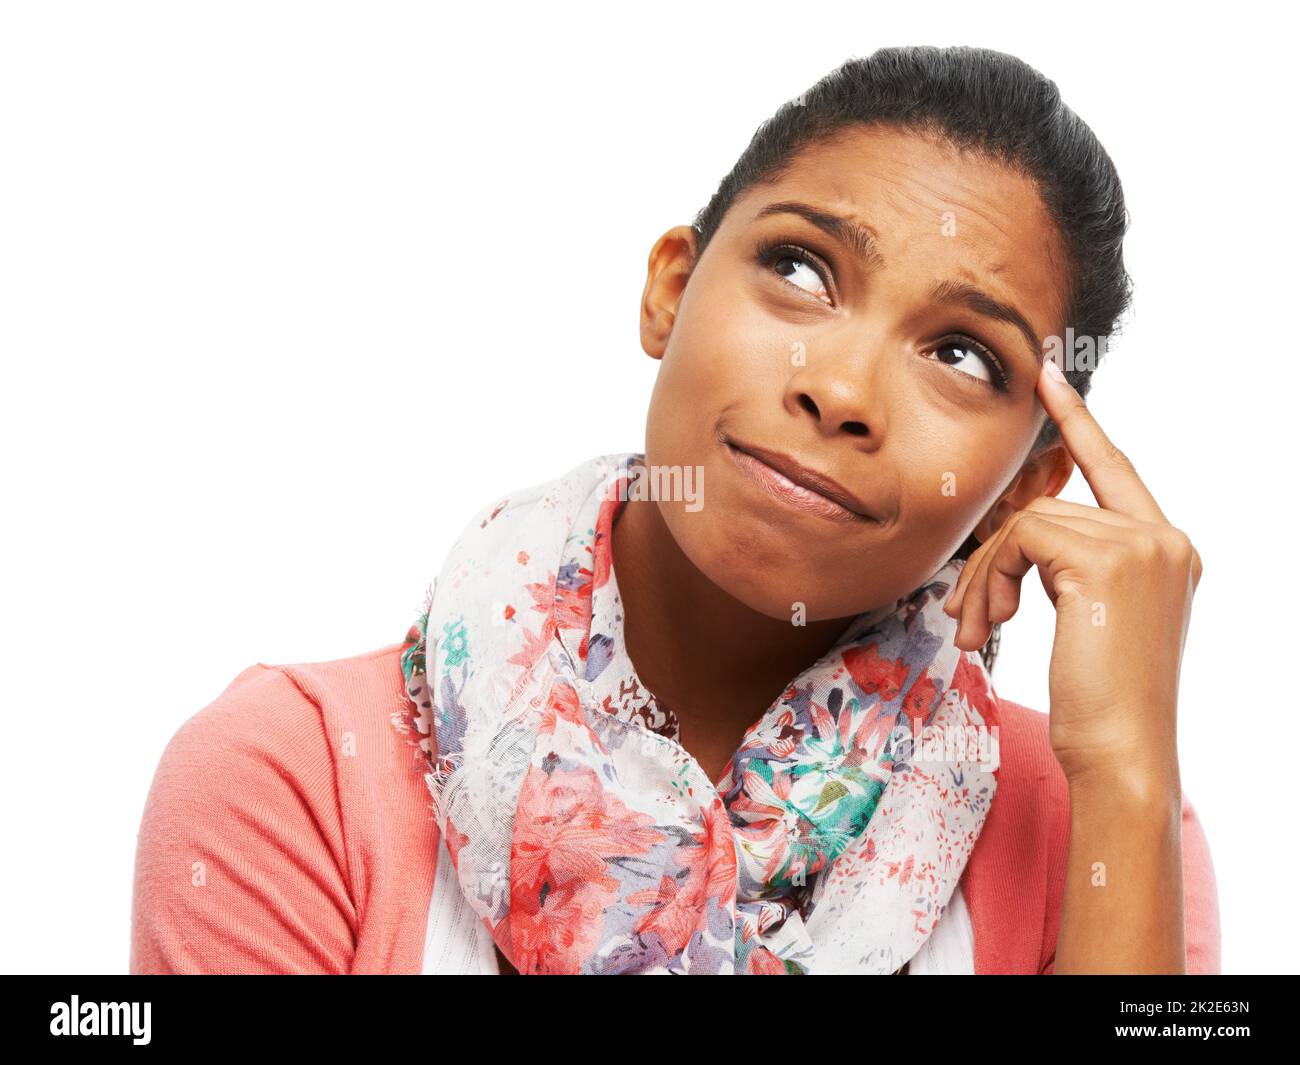 Wishing she could remember.... Cute young woman scratching her head and looking up thoughtfully. Stock Photo